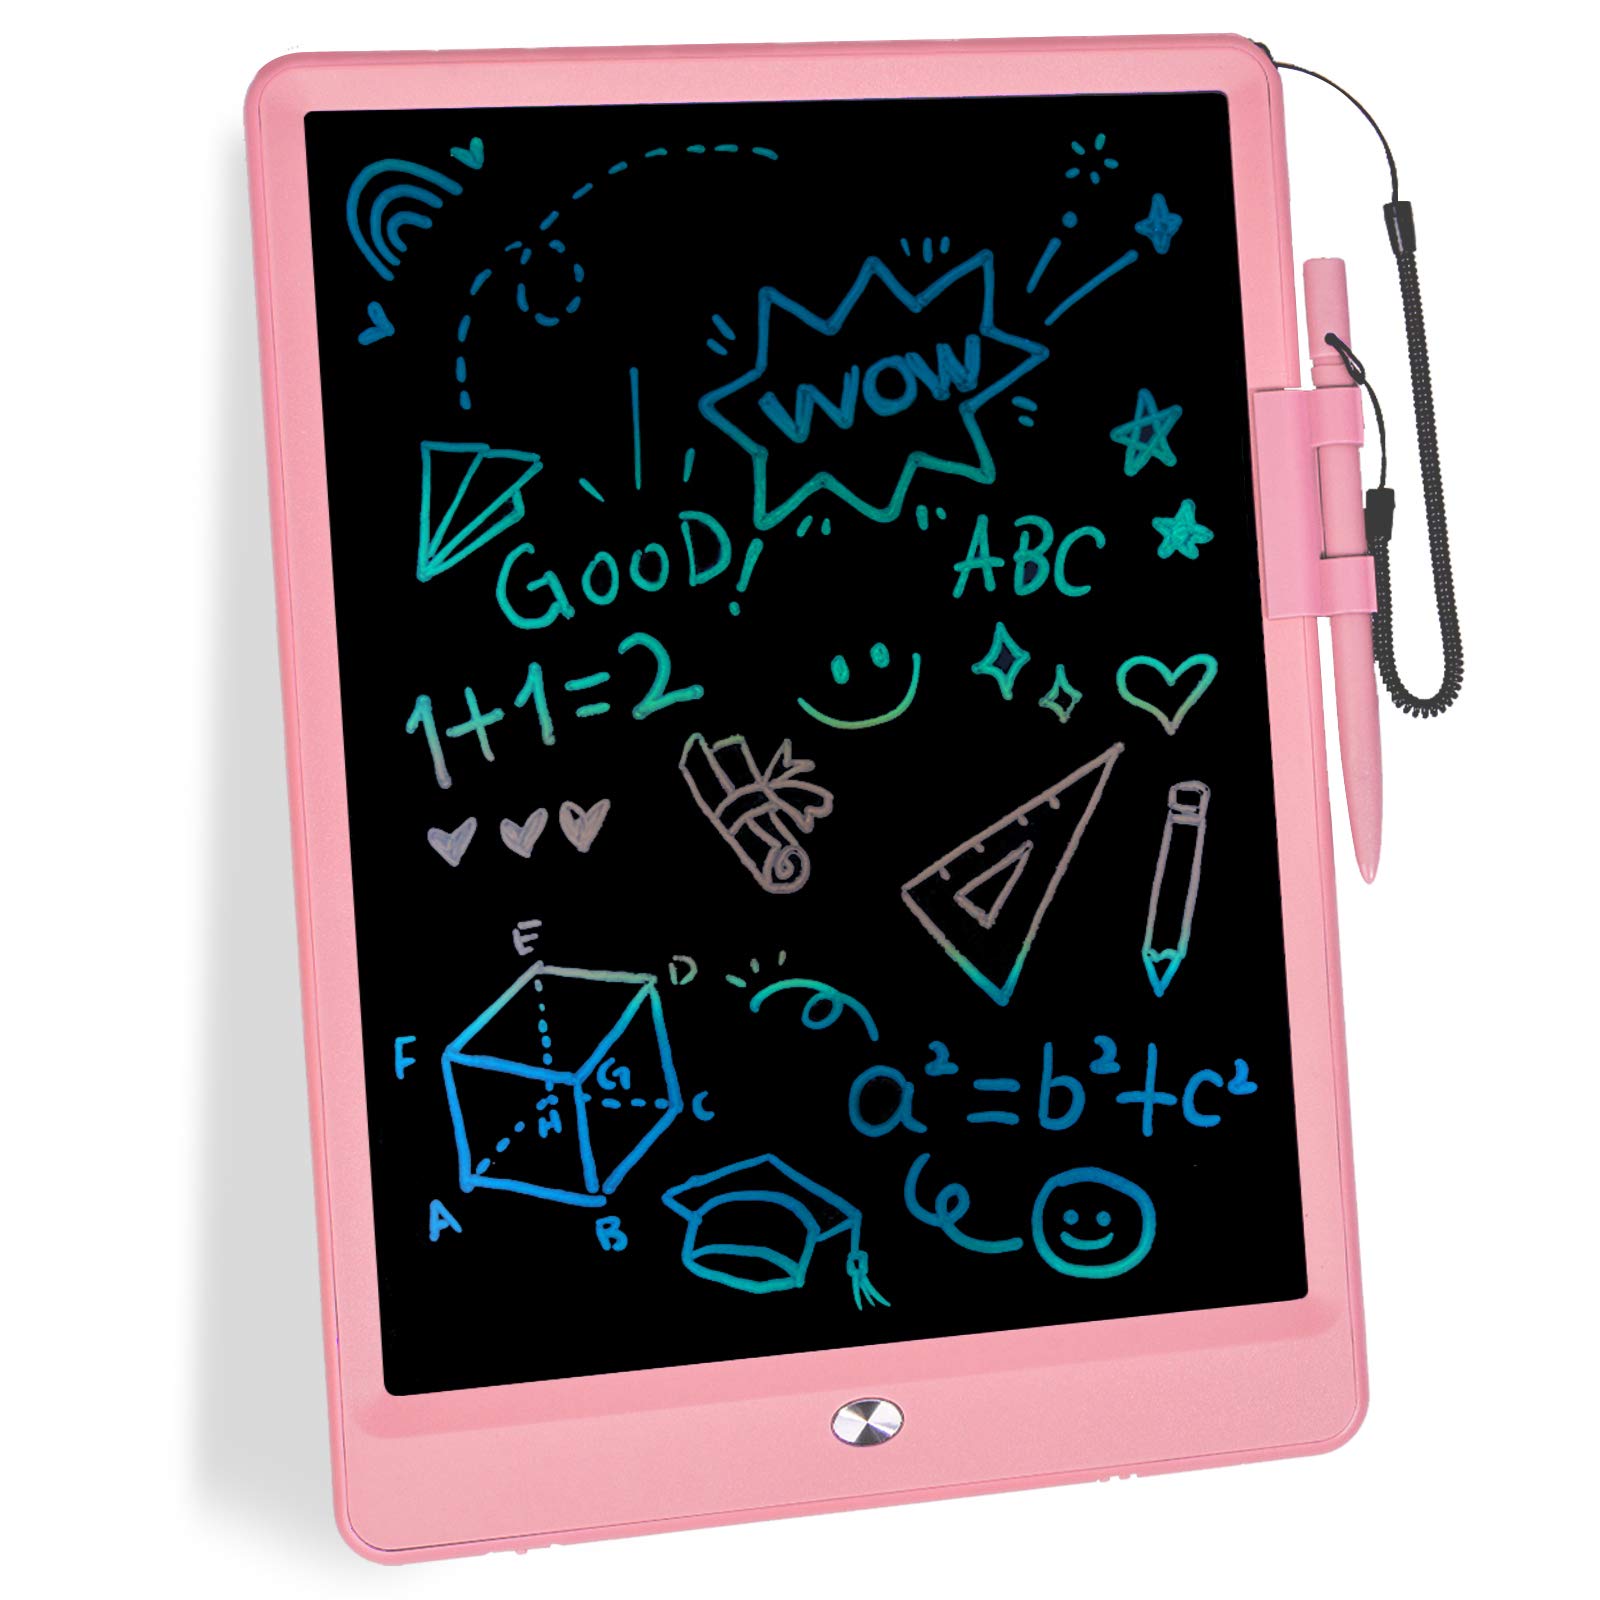 mloong LCD Writing Tablet,10 Inch Drawing Tablet Kids Tablets Doodle Board Electronic Digital Drawing Board for Adults and Kids Ages 3+ (Pink)